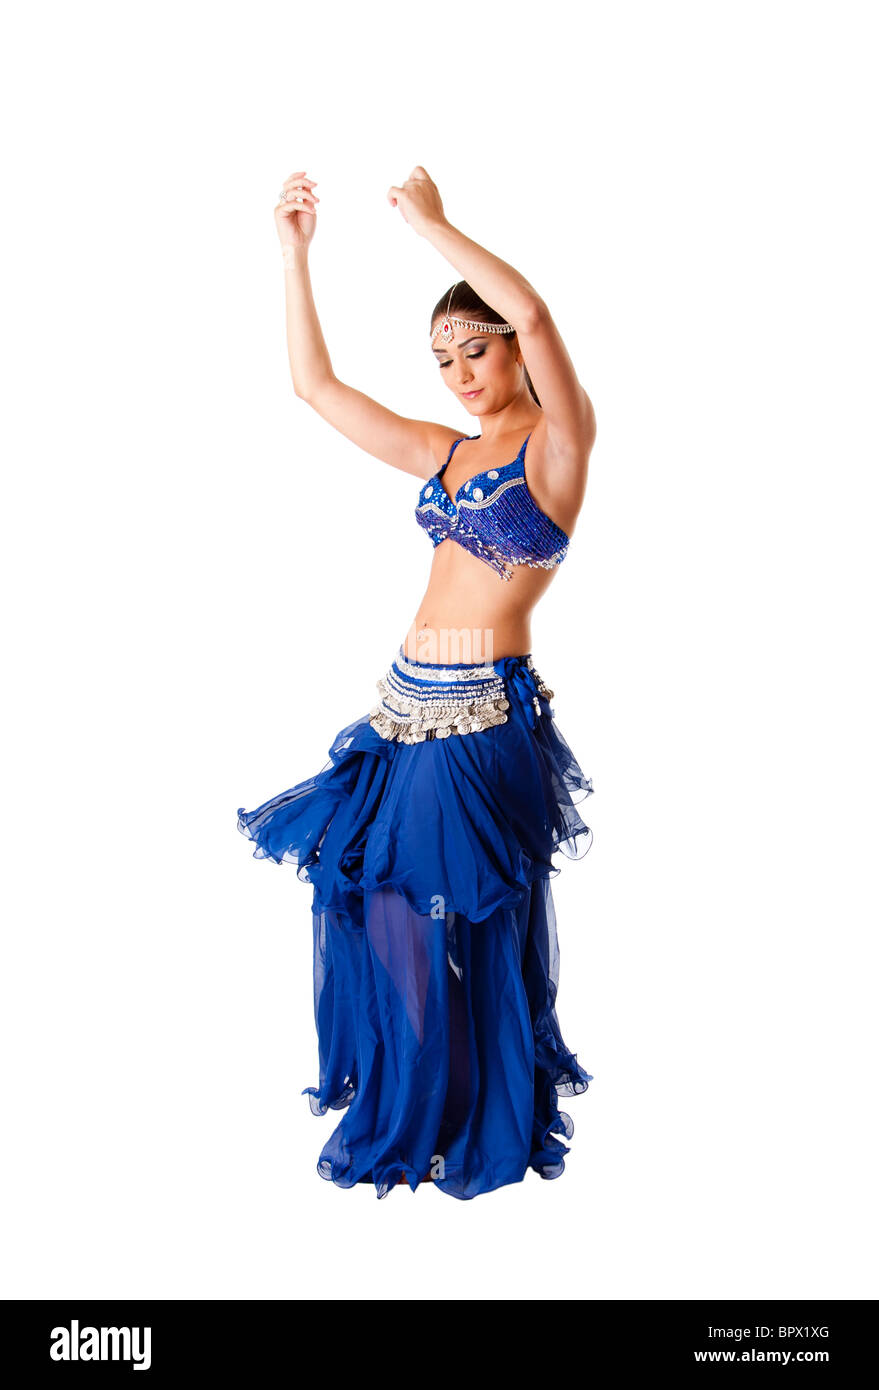 Beautiful Arabic belly dancer harem woman in blue with silver dress and head jewelry with gem dancing swirling skirt, isolated. Stock Photo